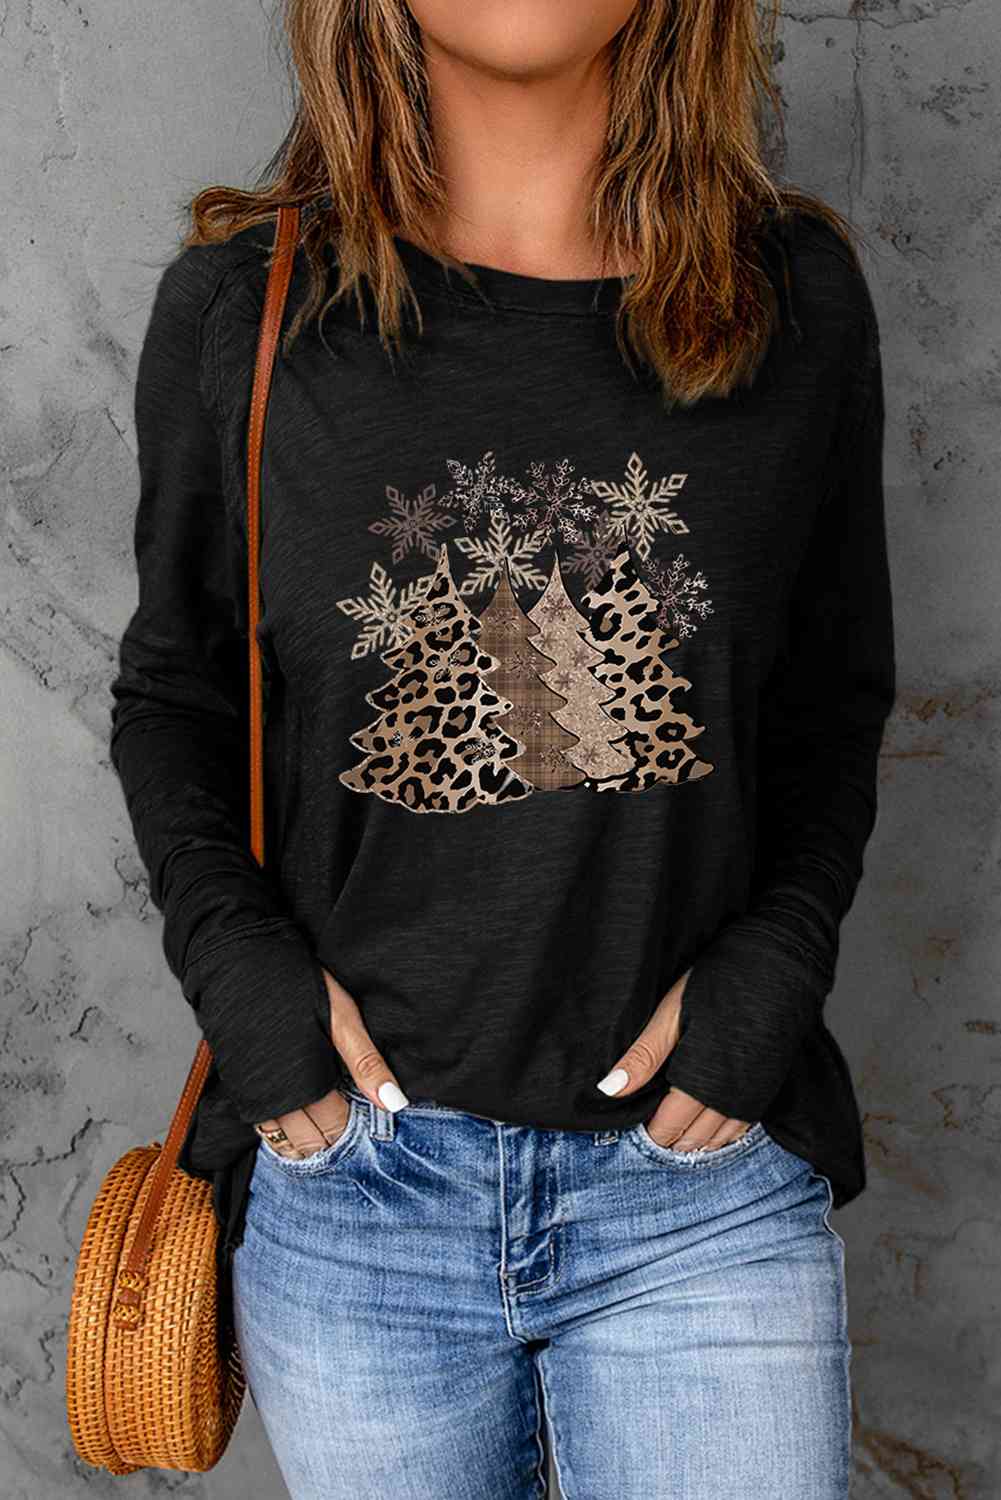 Christmas Tree Graphic Long Sleeve T-Shirt Print on any thing USA/STOD clothes